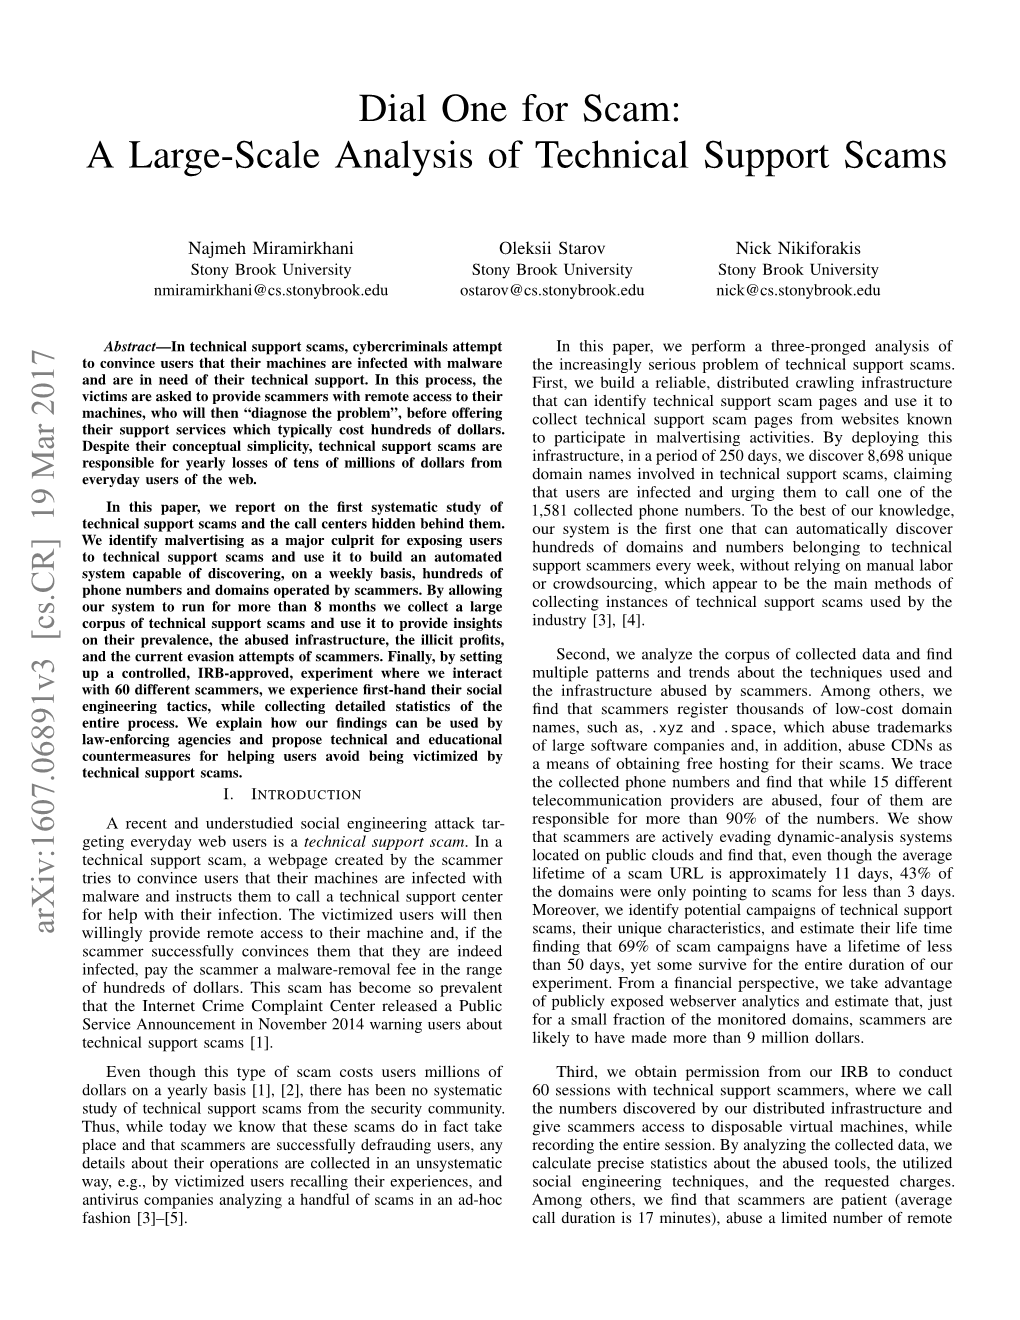 Dial One for Scam: a Large-Scale Analysis of Technical Support Scams